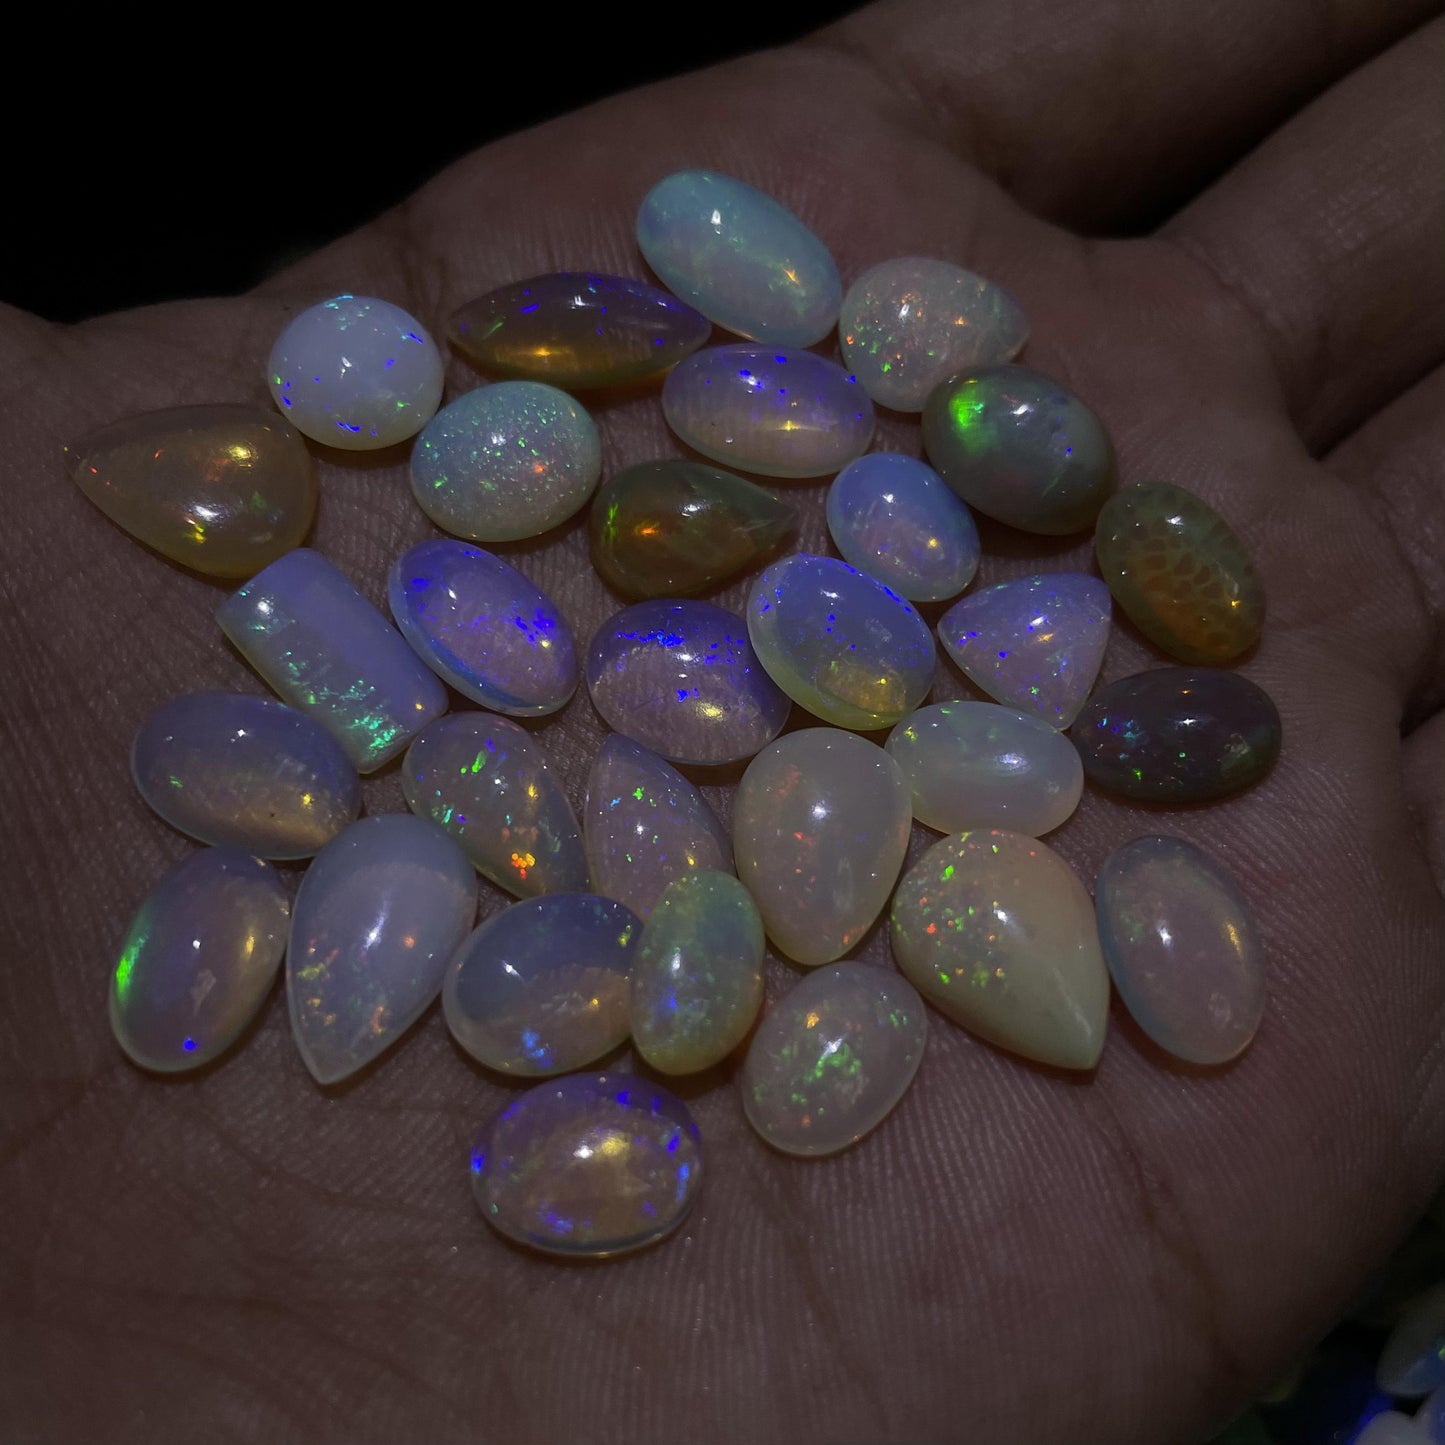 Glowing Beauty: Exquisite Natural Ethiopian Opal Cabochon - Average Size 1.9 cts